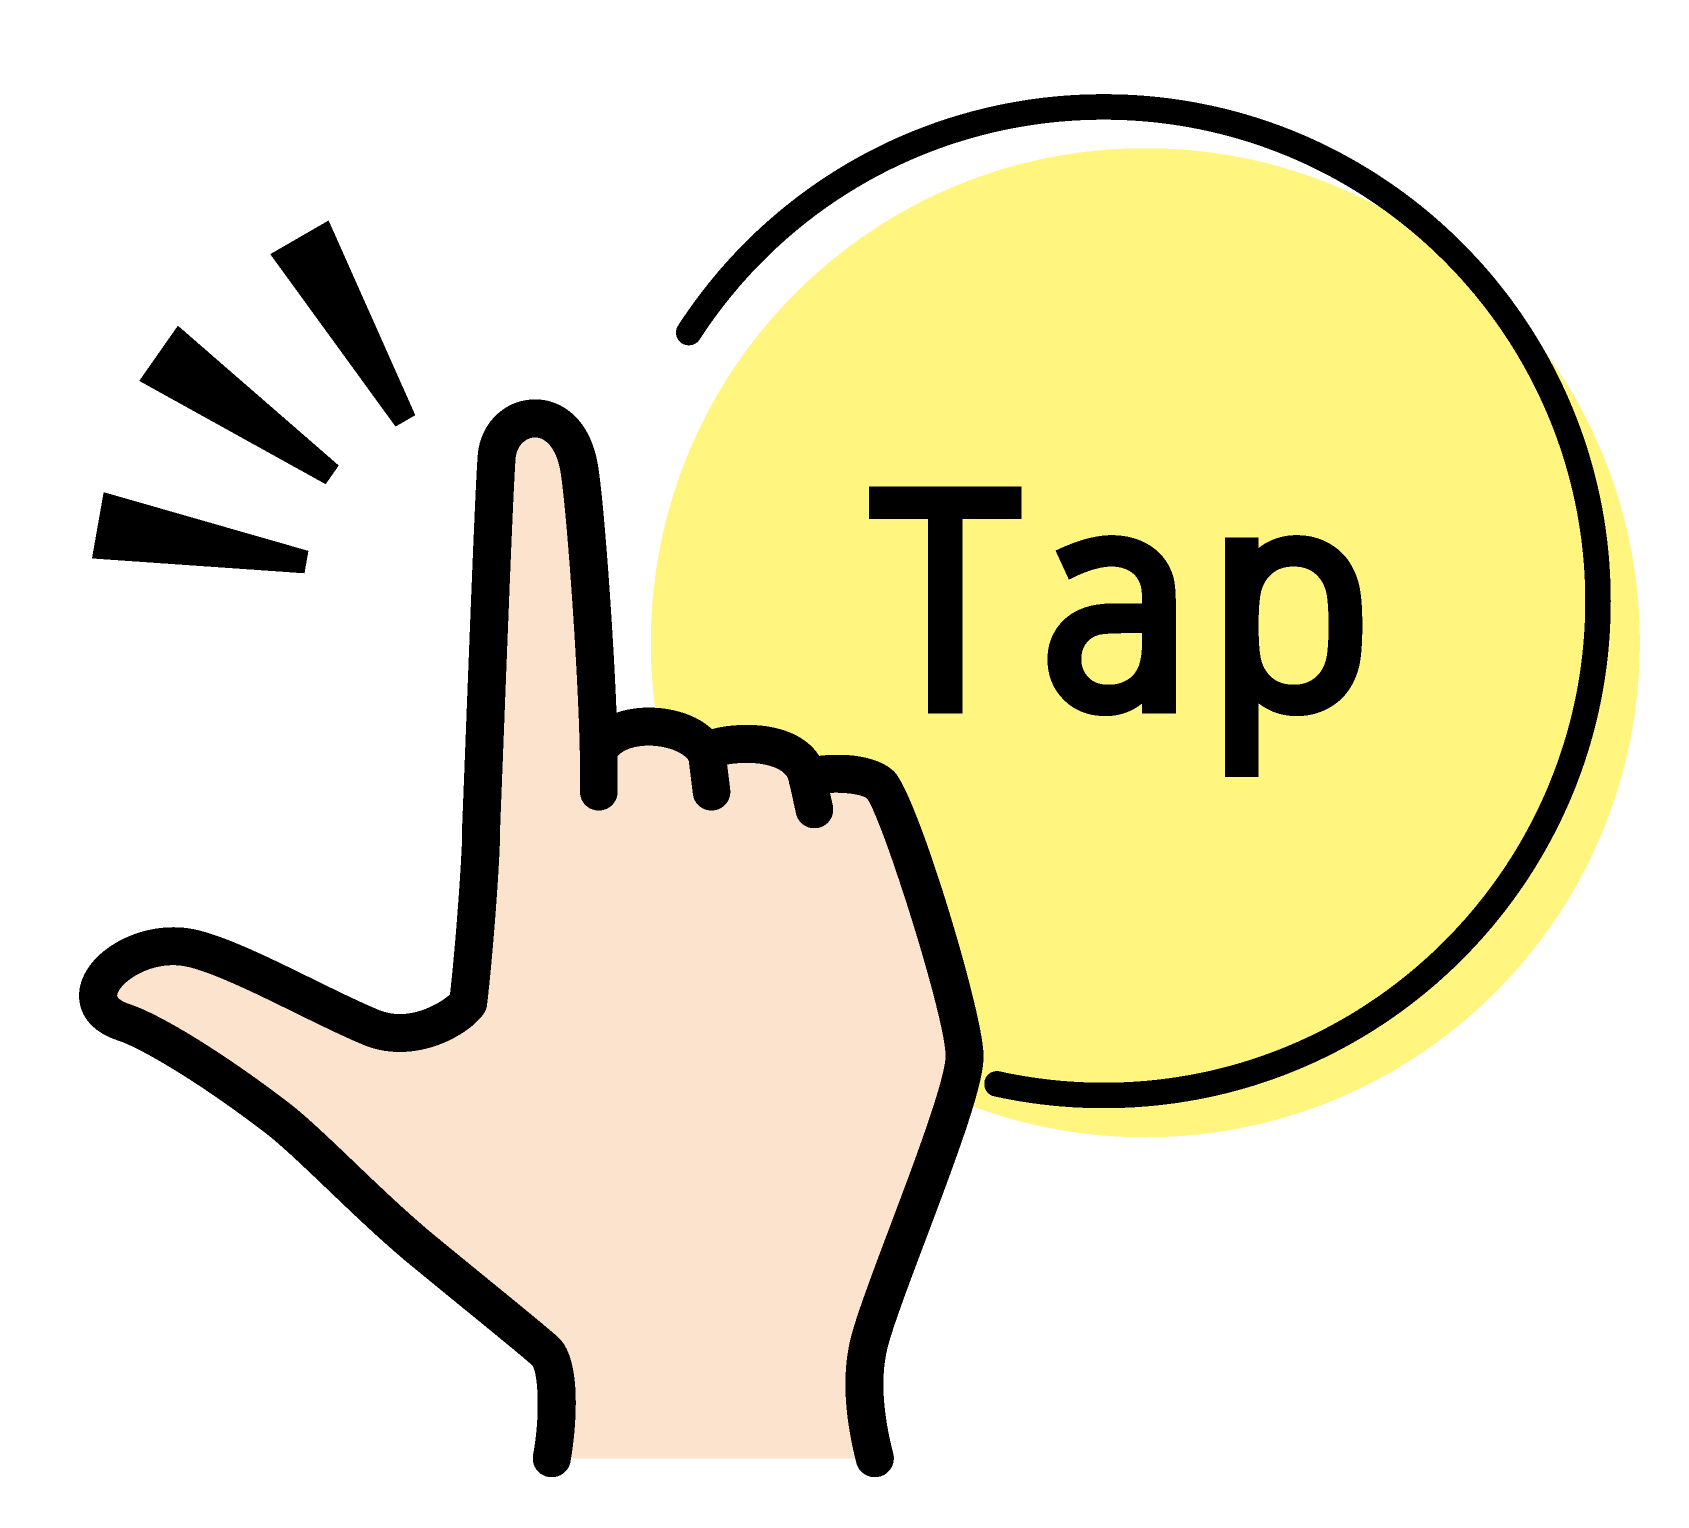 tap here!